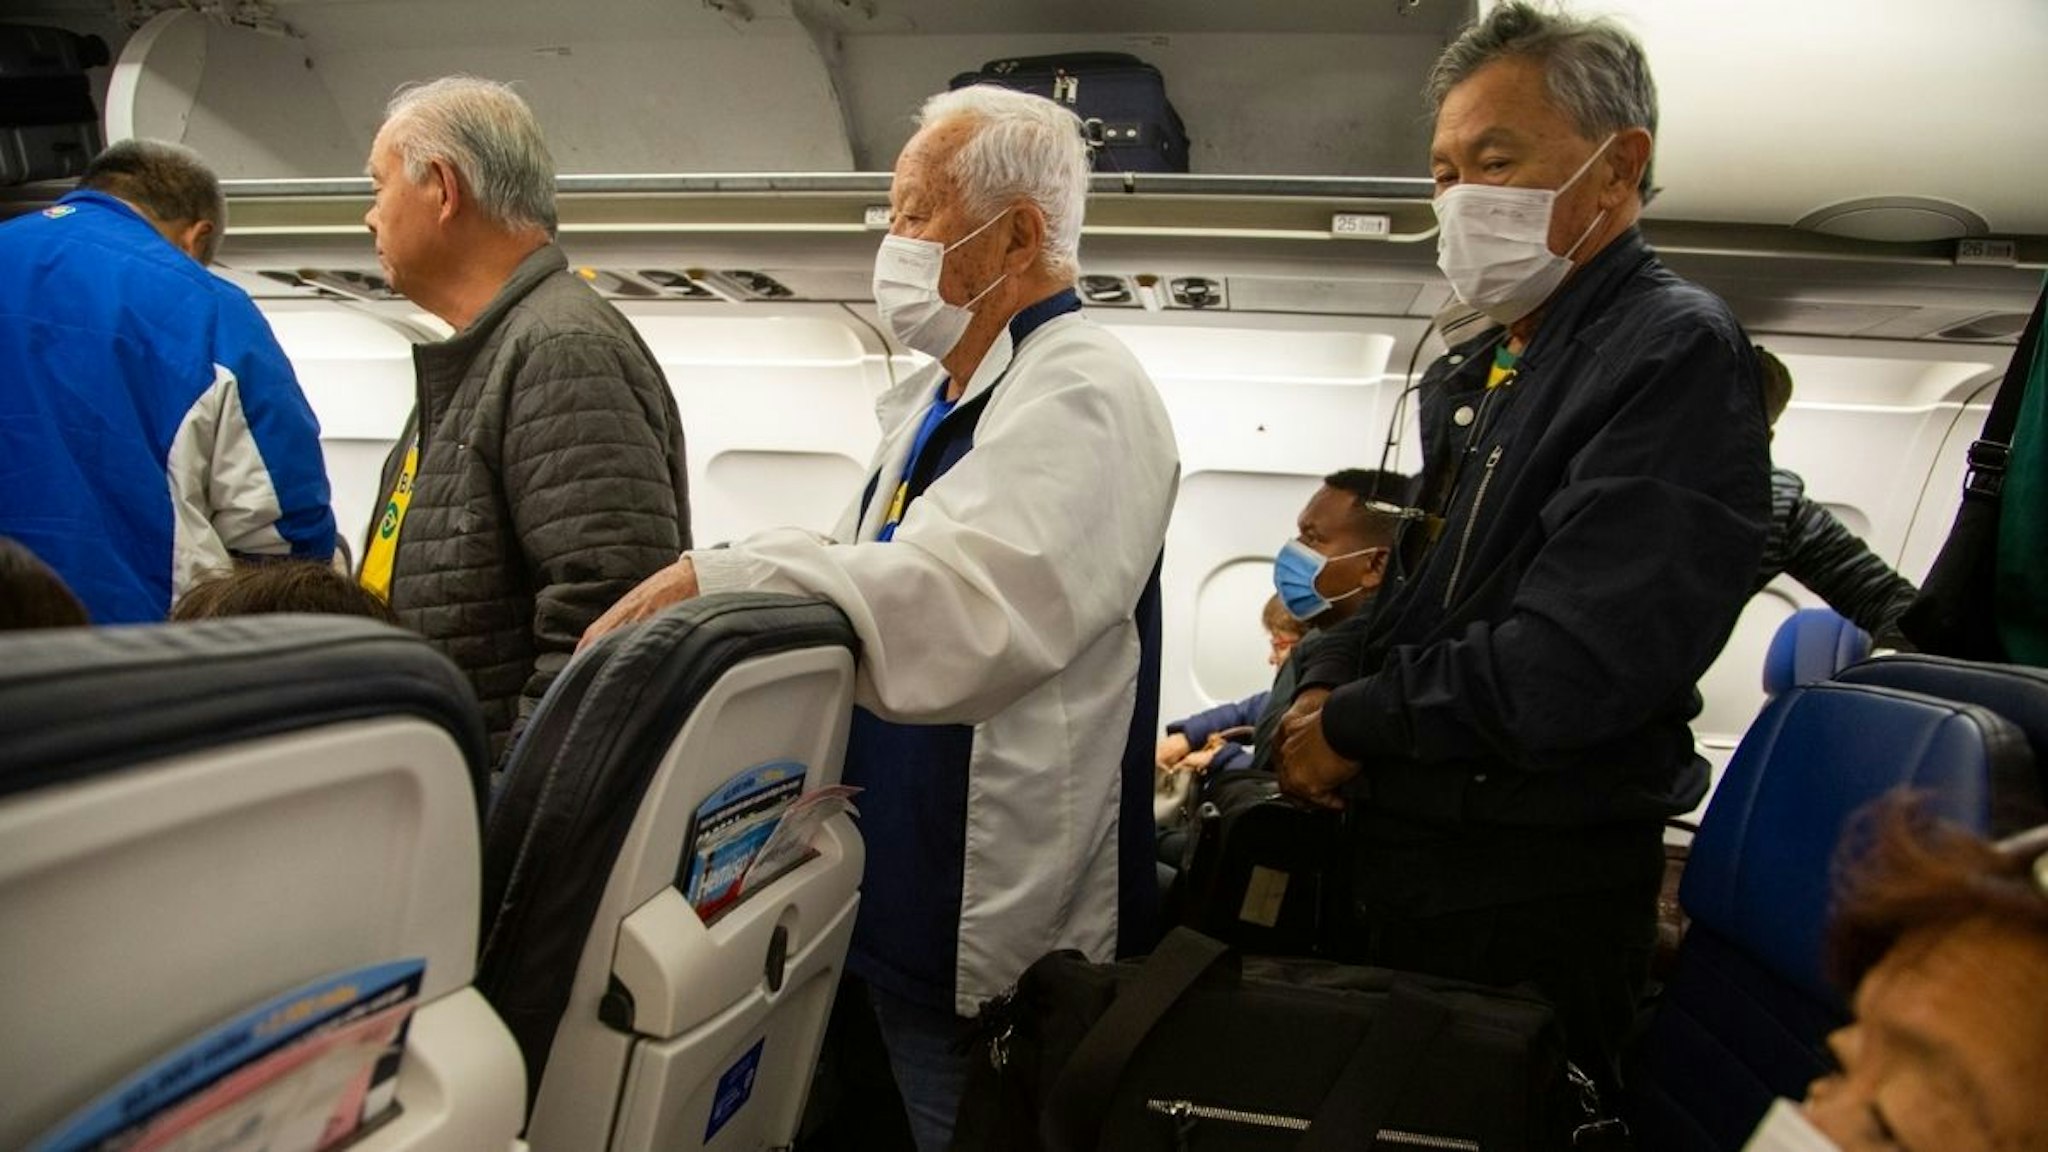 Passengers wear protective face masks in a airplane after arrival in Houston International Airport on March 14, 2020 in Houston, Texas.